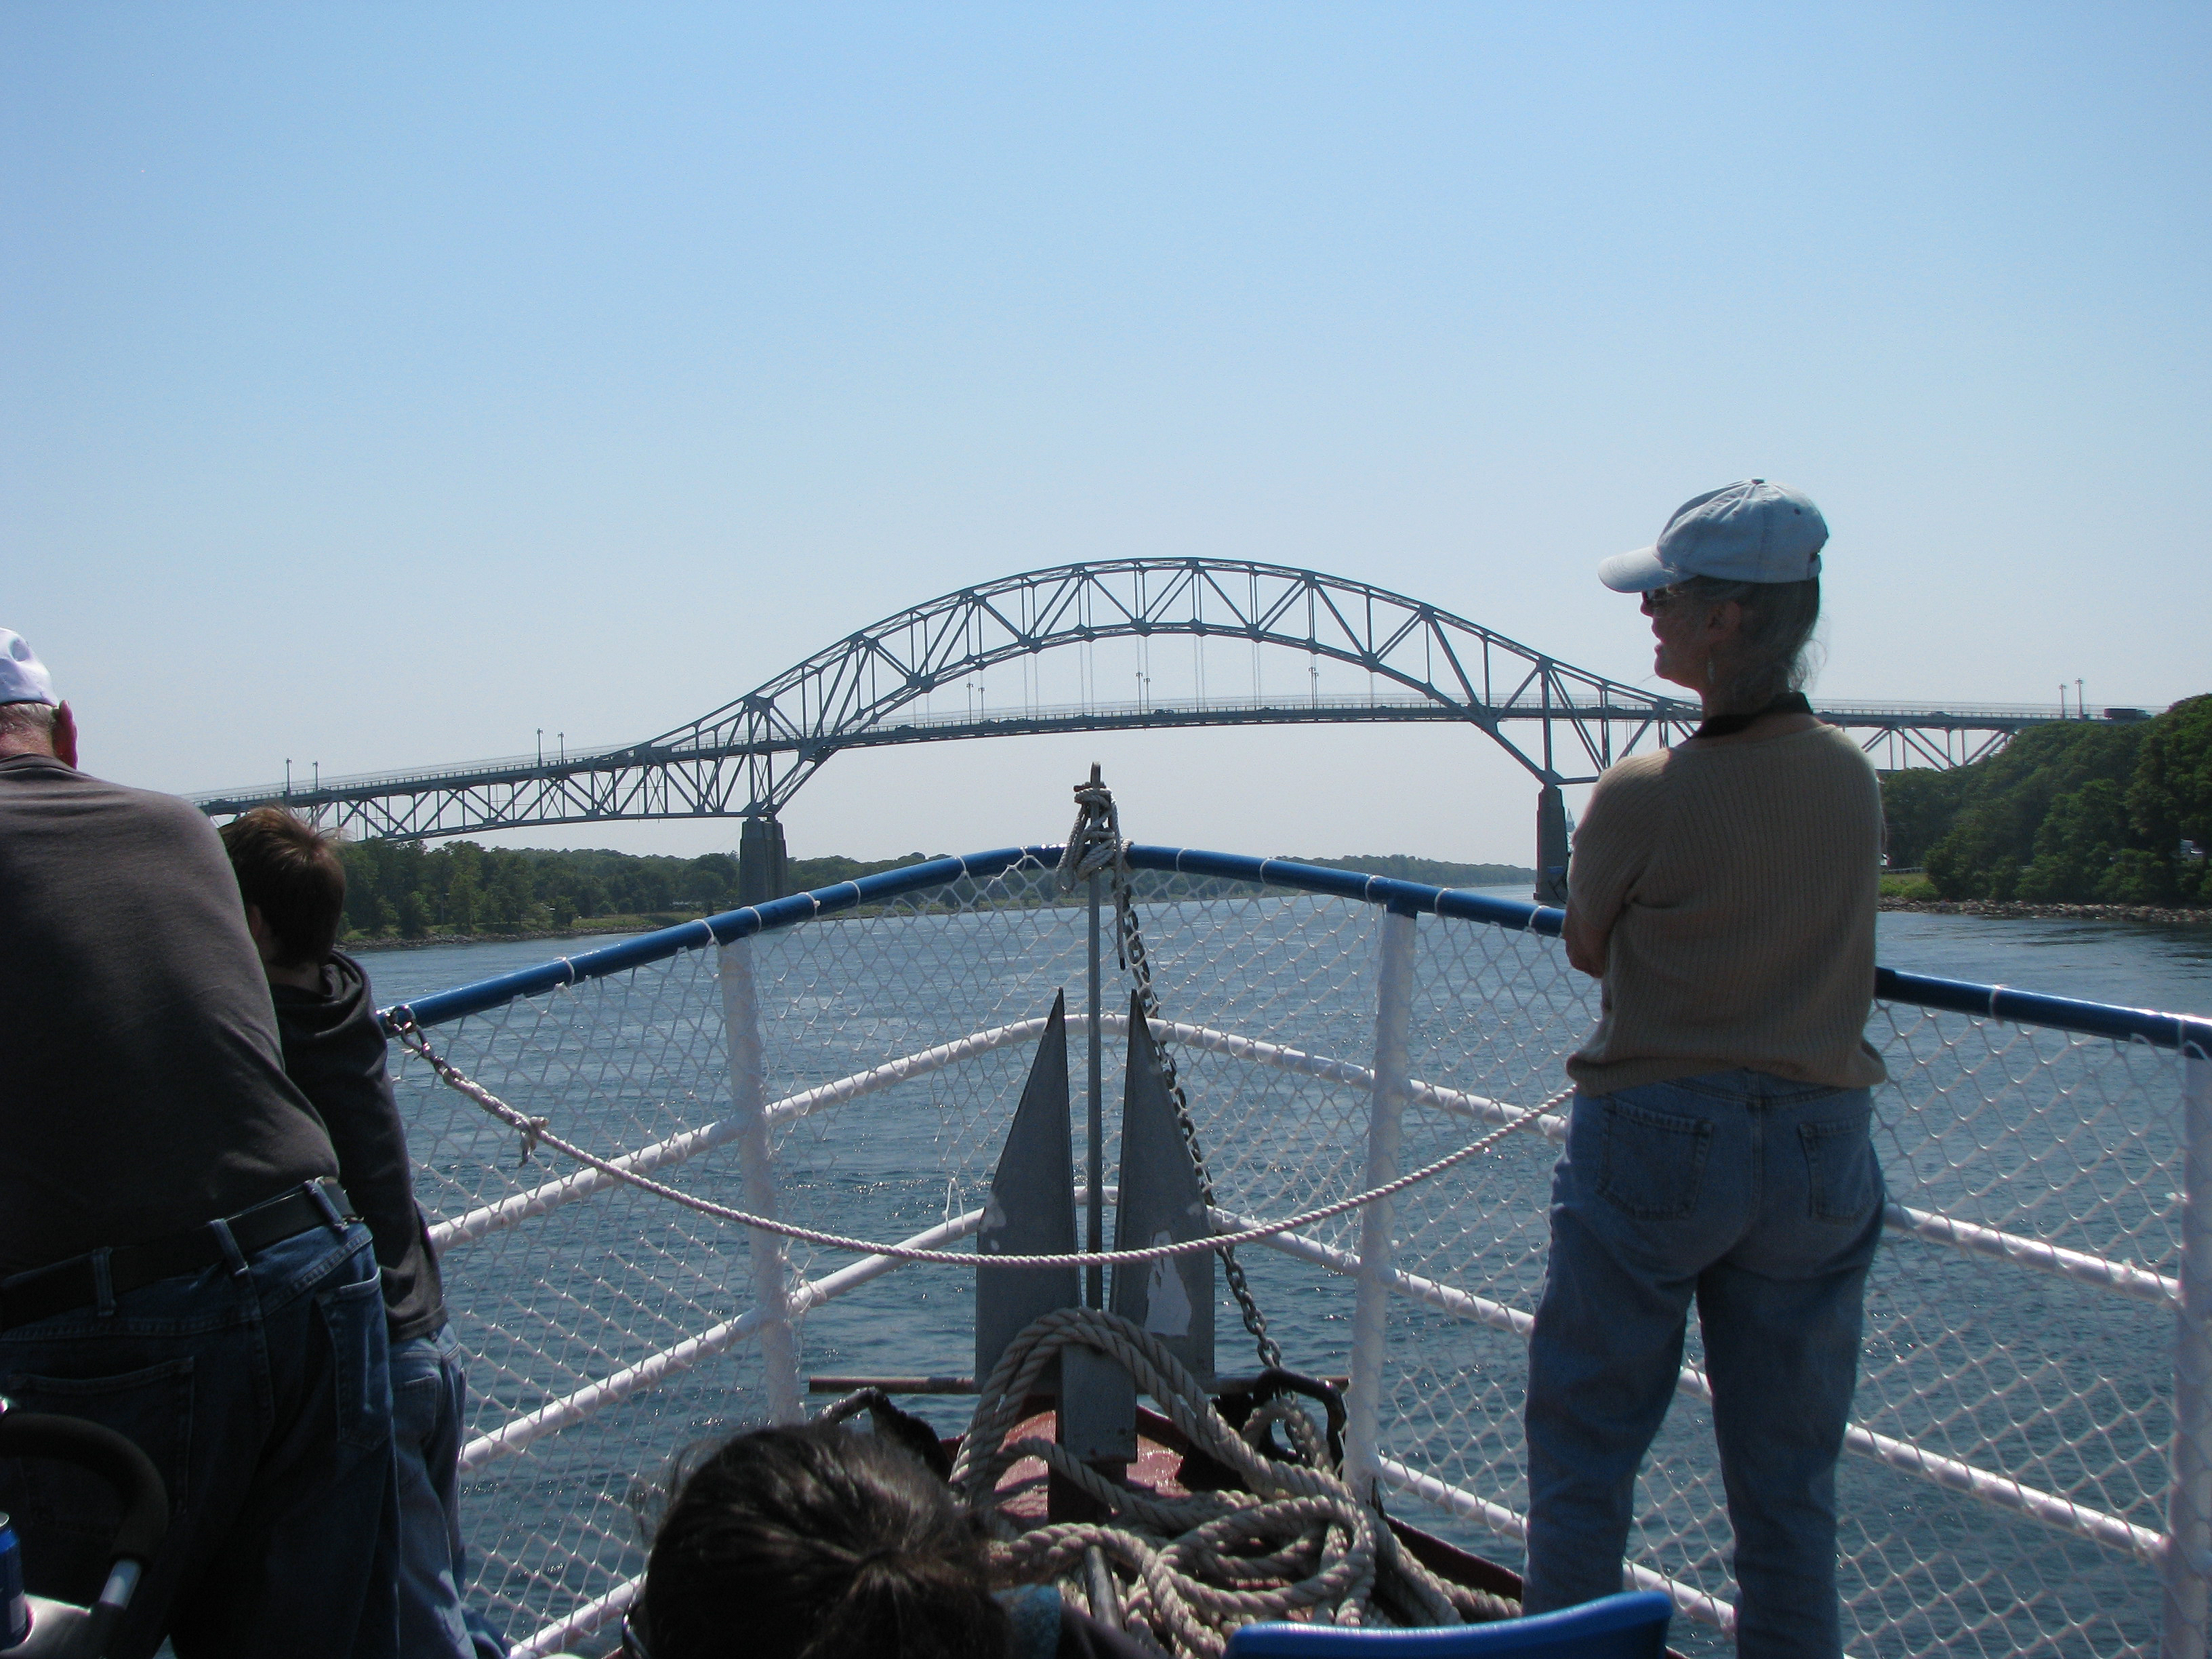 Cruise the Cape Cod Canal!